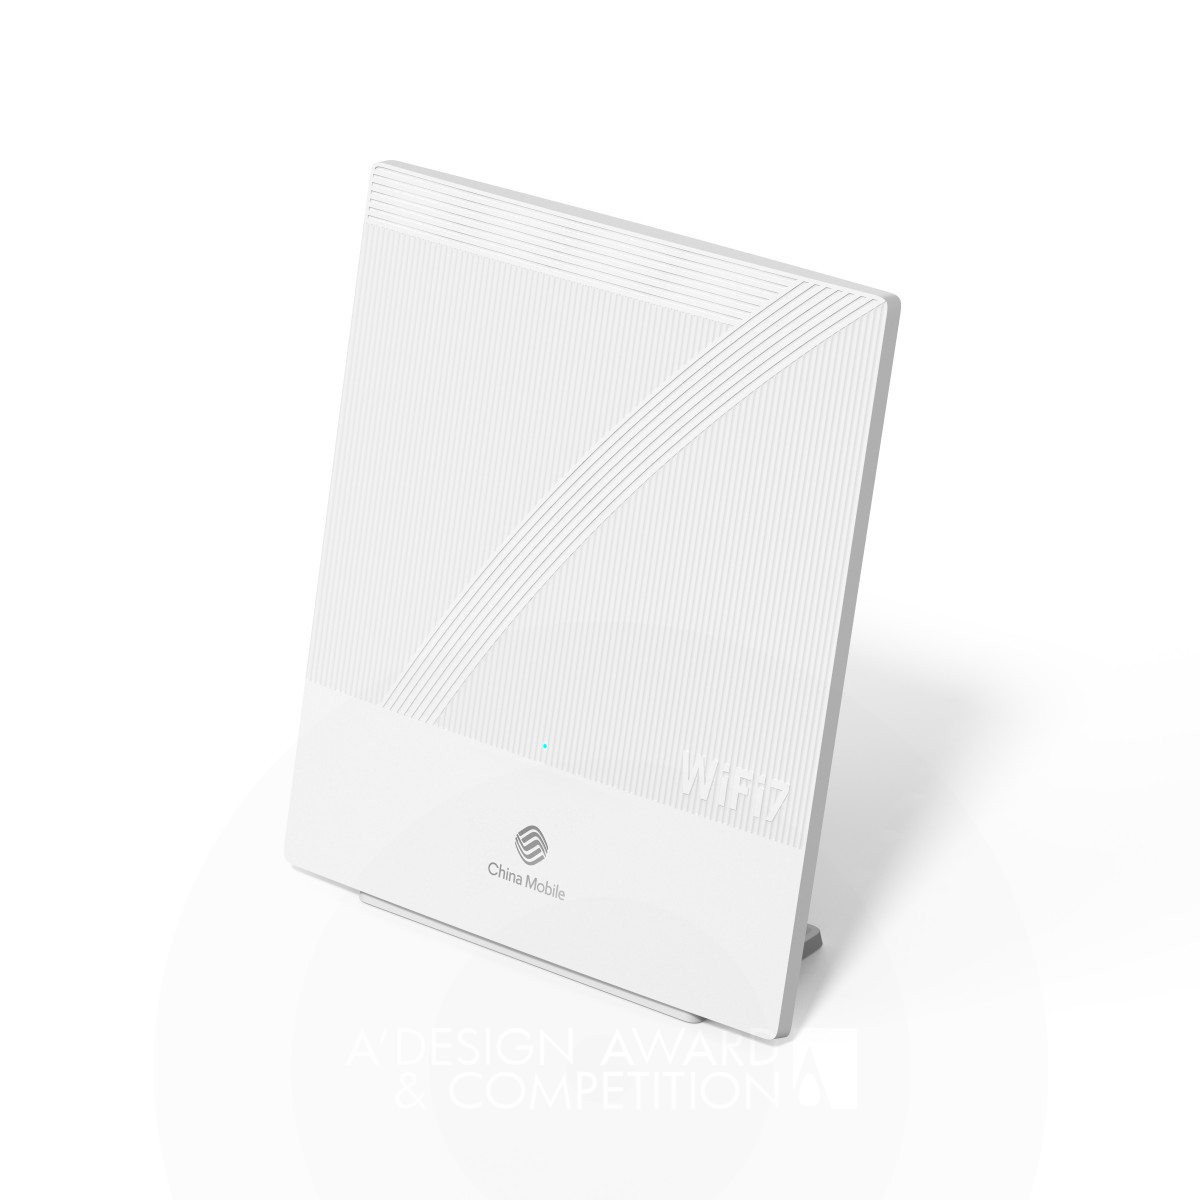 Cmcc R3600H WiFi7 Router